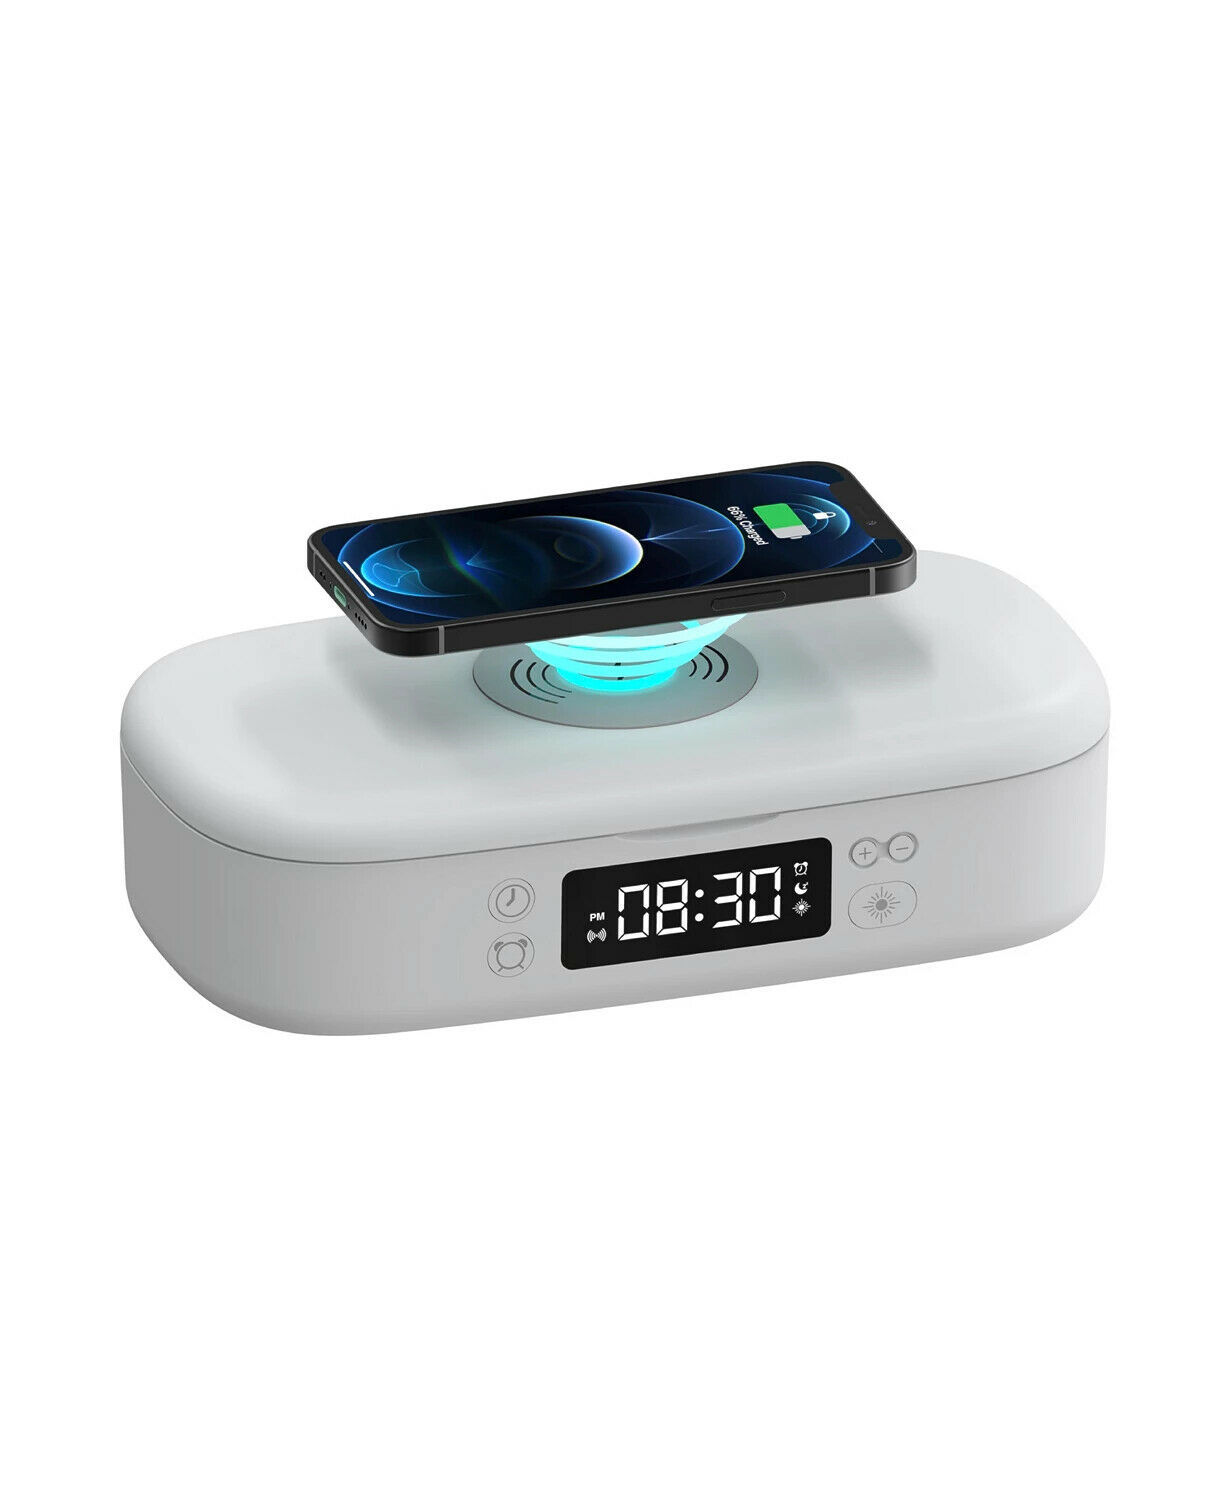 Tzumi Ionuv Sanitizer with Aromatherapy, Clock, and Wireless Charging